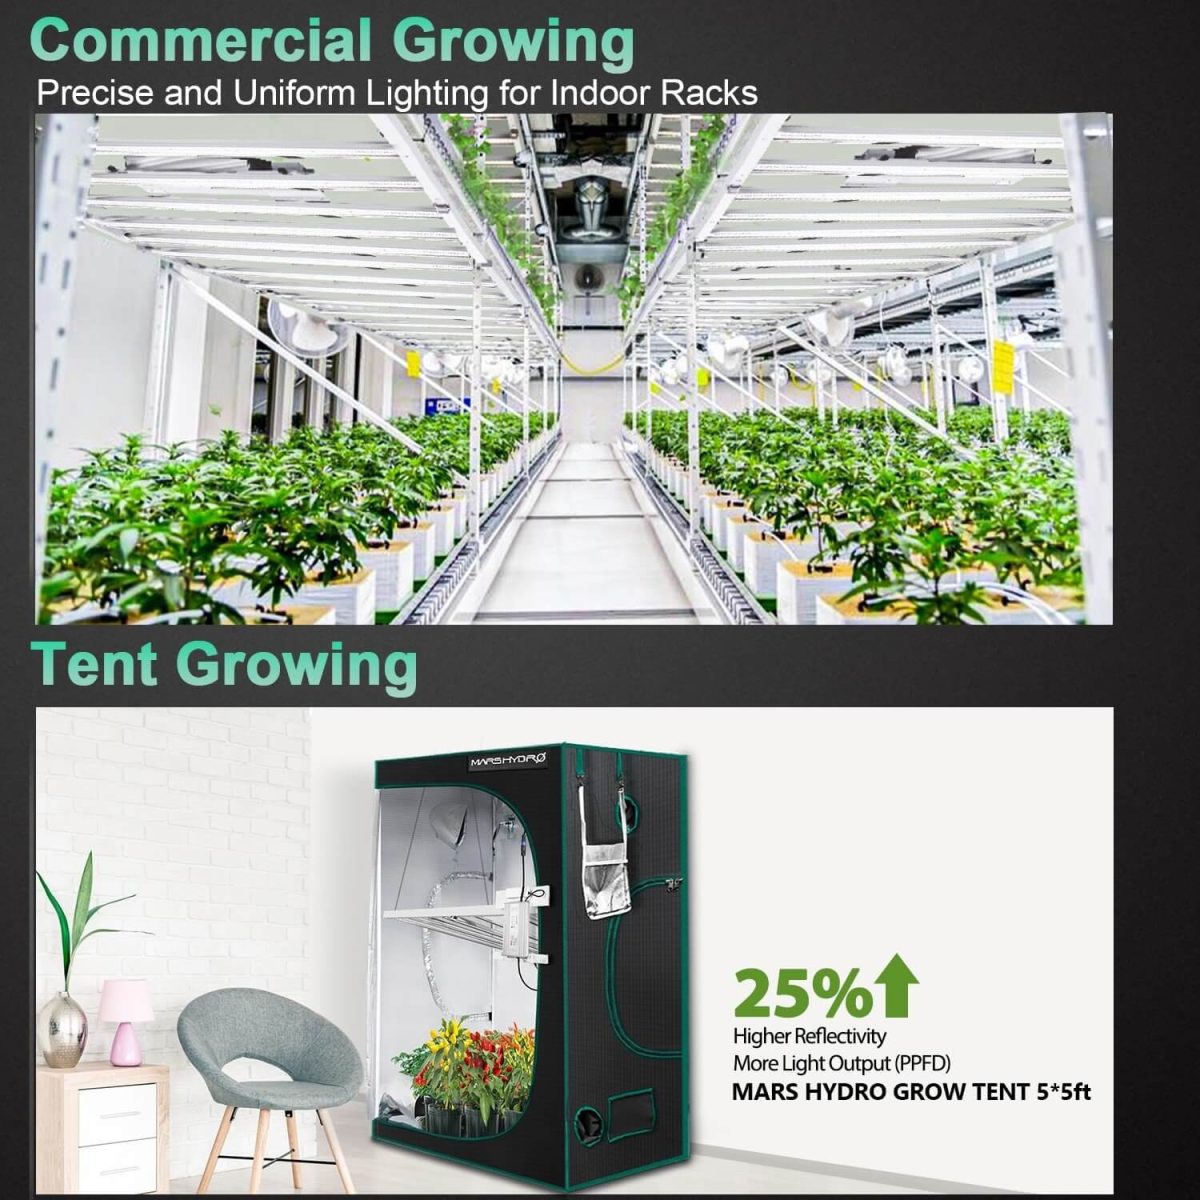 Mars Hydro FC-E6500 LED grow light is a commercial cultivation lighting solution for uniform PPFD in vertical farming and multi-rackings.